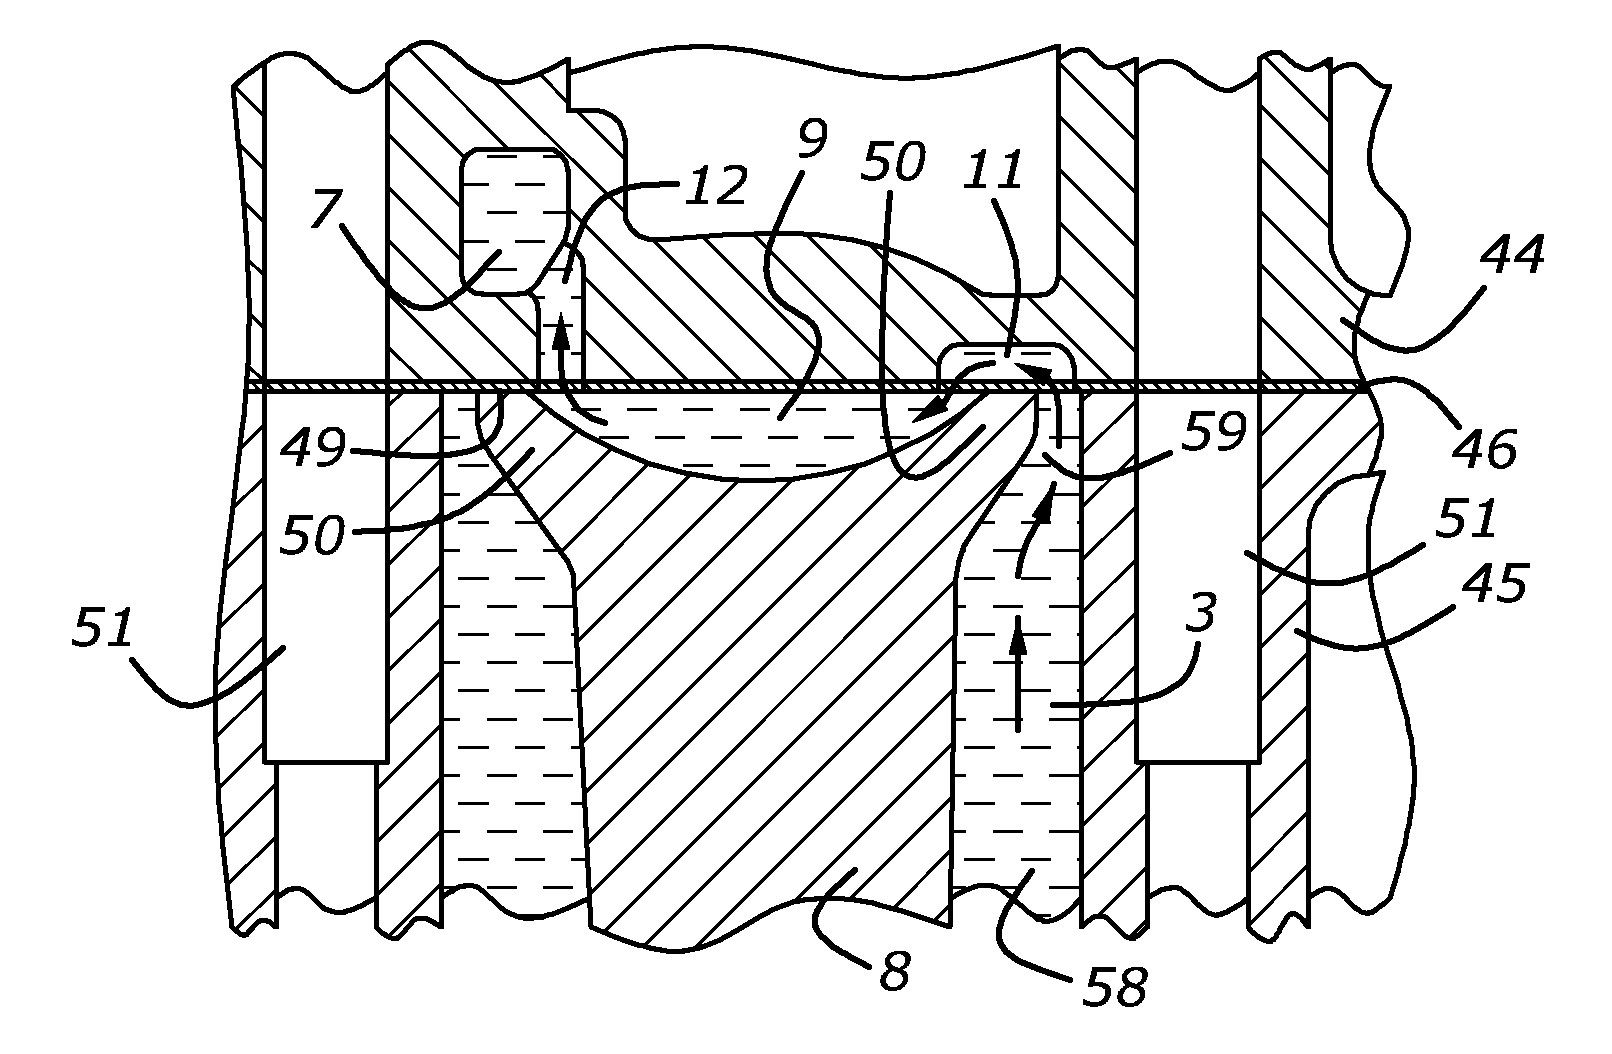 Cooling system defined in a cylinder block of an internal combustion engine